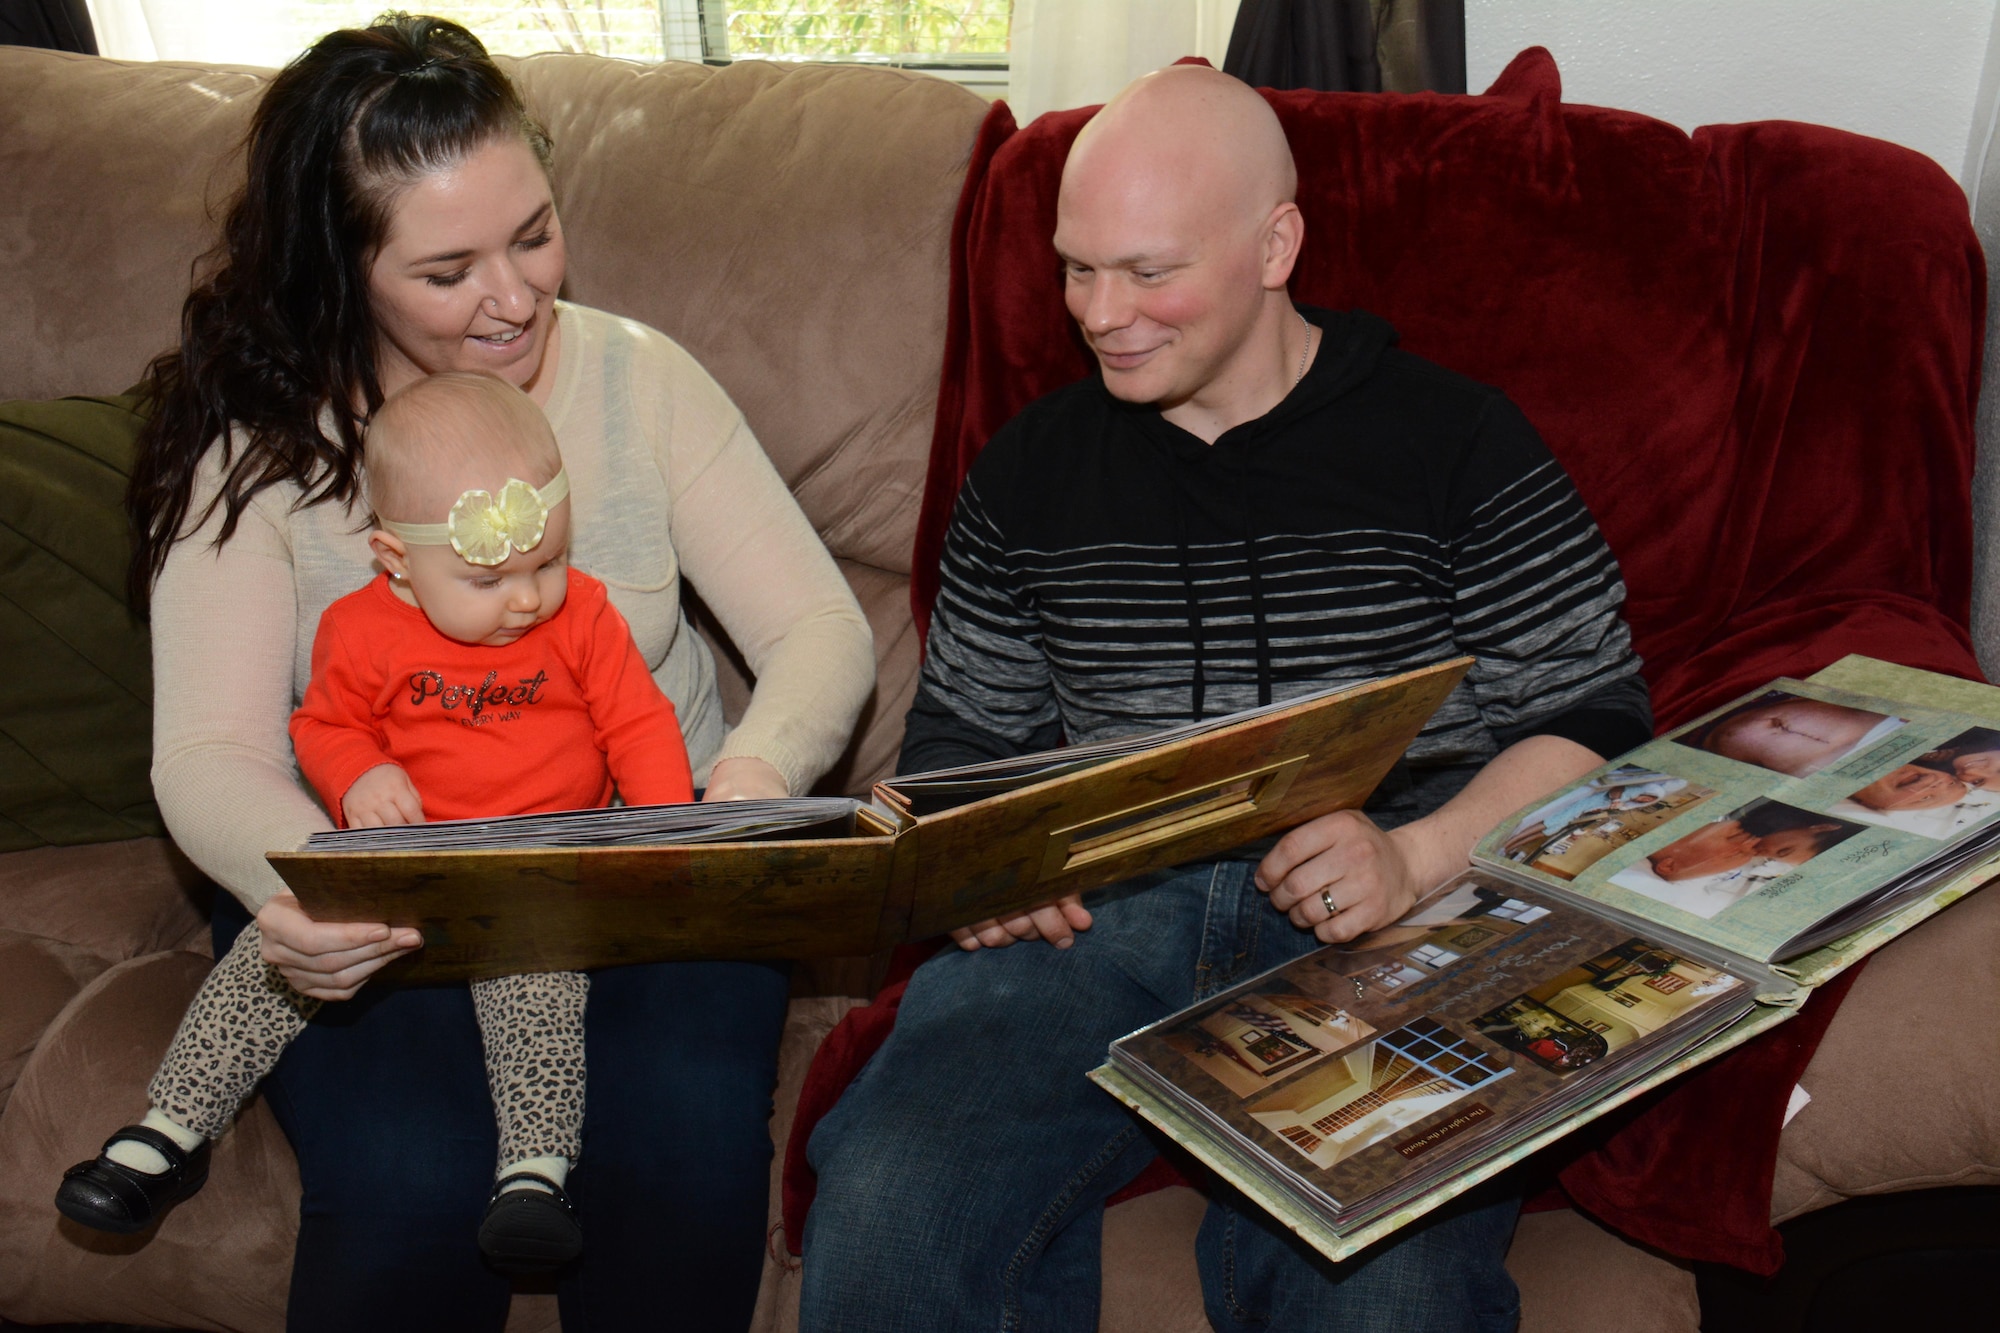 Staff Sgt. Richard L. Johnson and his wife, Christa, look at two scrapbooks with their daughter, Ayda, inside their home Feb. 13, 2014, in California. Christa designed the scrapbooks to document Richard’s seven-month long fight against cancer. Now cancer free, Richard said he feels blessed and he’s looking forward to getting back to work. Johnson is a 660th Aircraft Maintenance Squadron KC-10 crew chief. (U.S. Air Force photo/Tech. Sgt. James M. Hodgman)